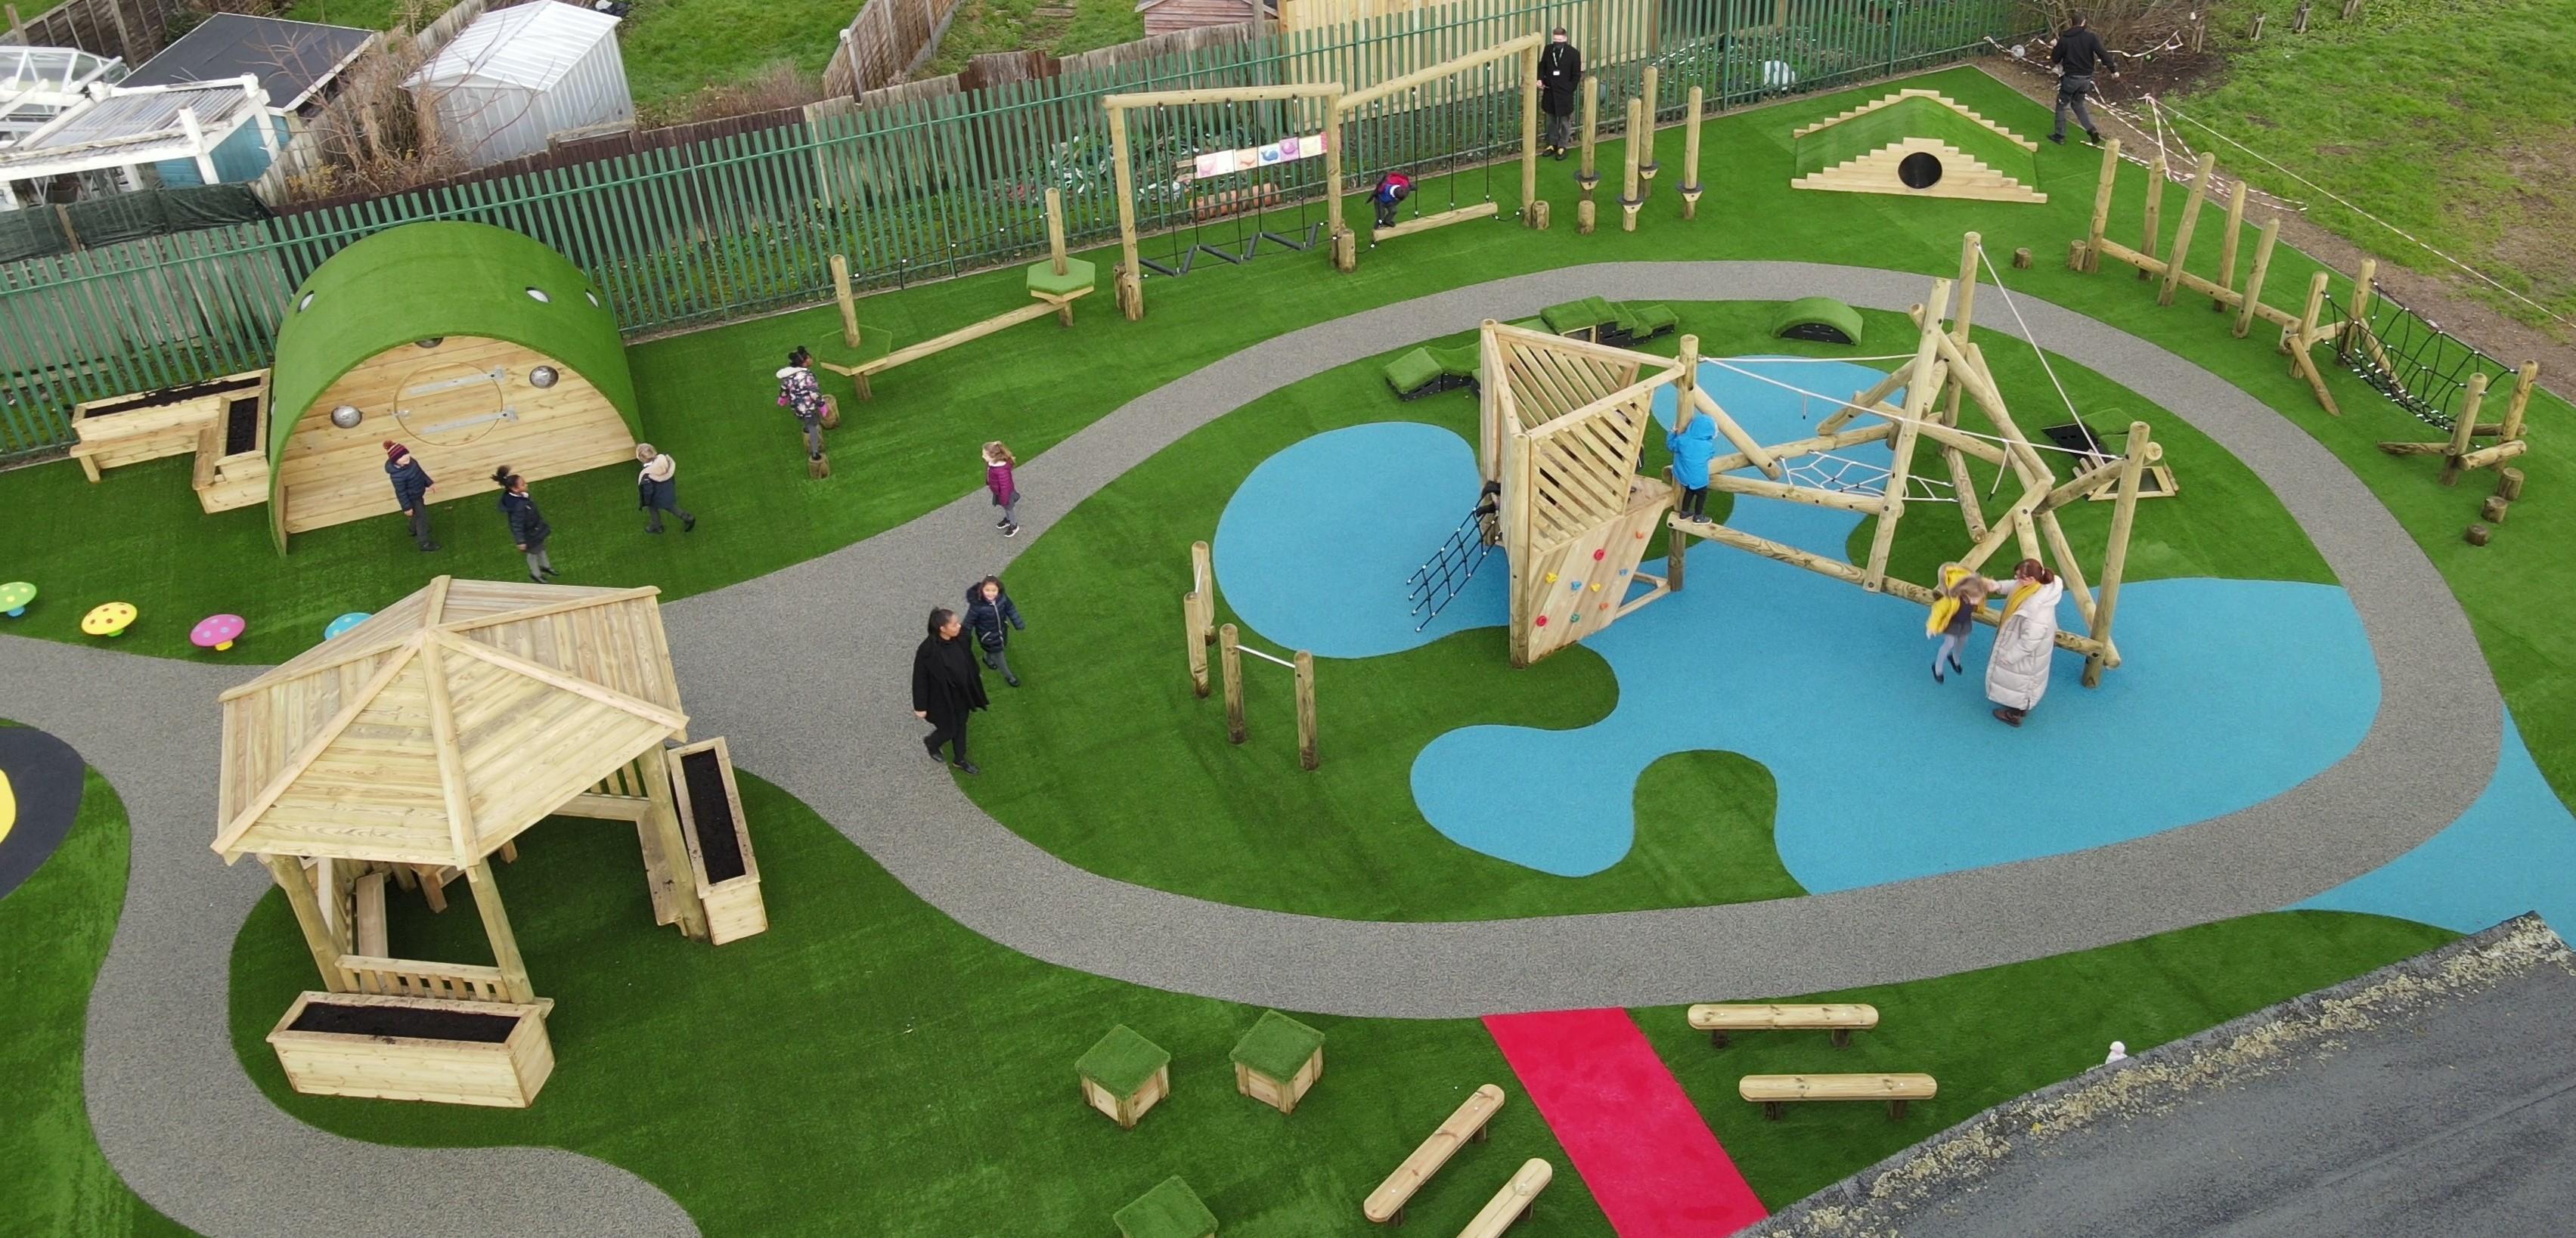 large playground scheme for primary school with climbing frame, artificial grass, outdoor classroom and trim trails